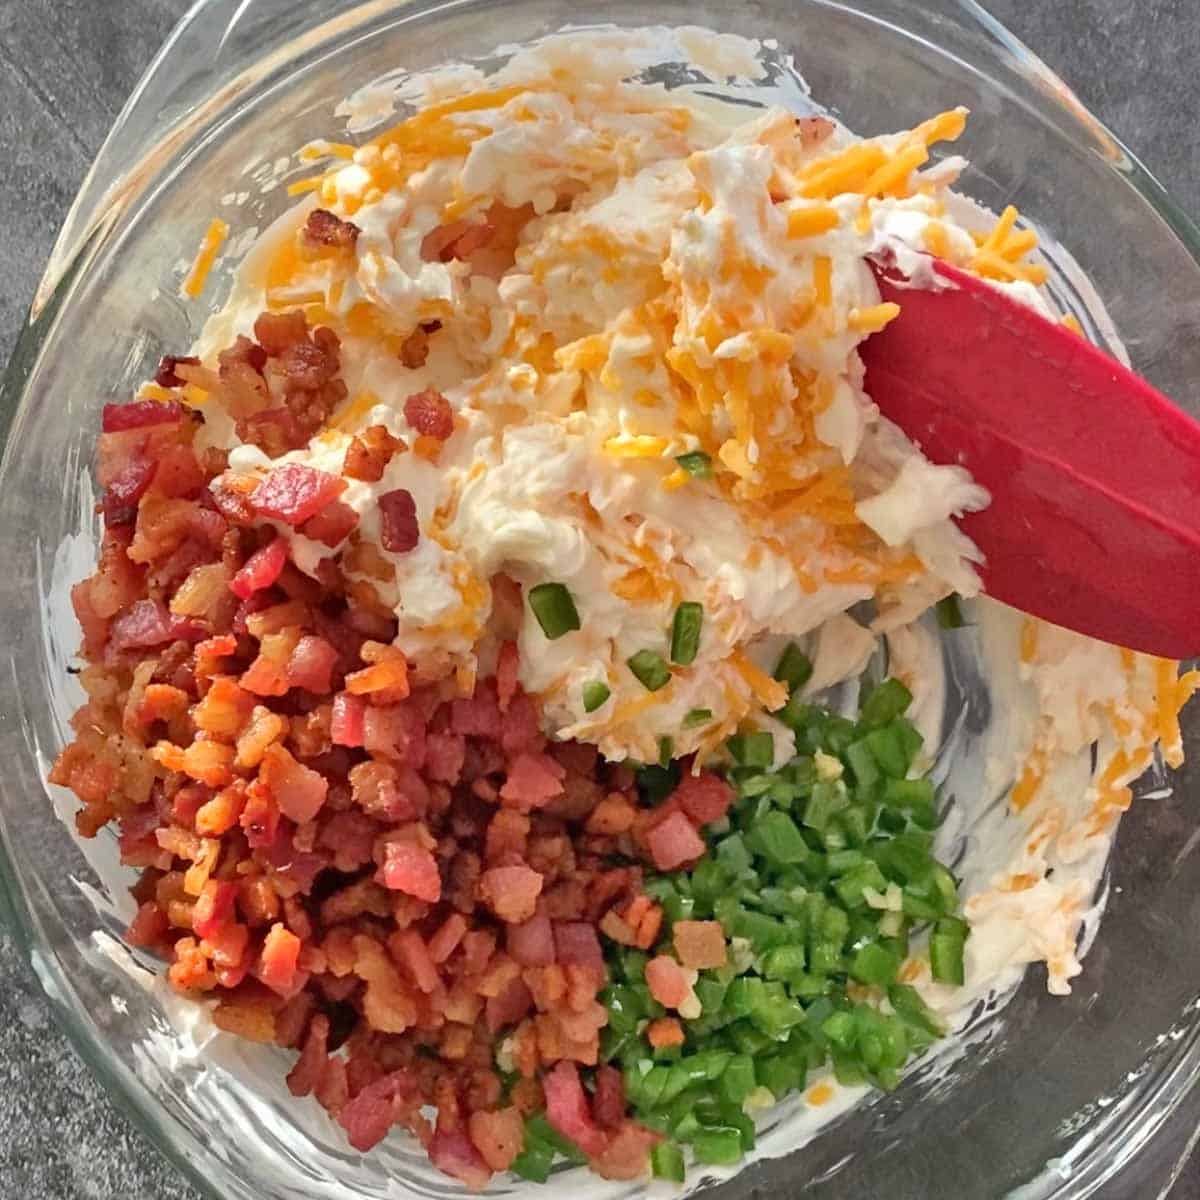 Stirring cooked bacon bits, jalapeno, cheddar cheese, sour cream and cream cheese with a red spatula in a glass bowl.